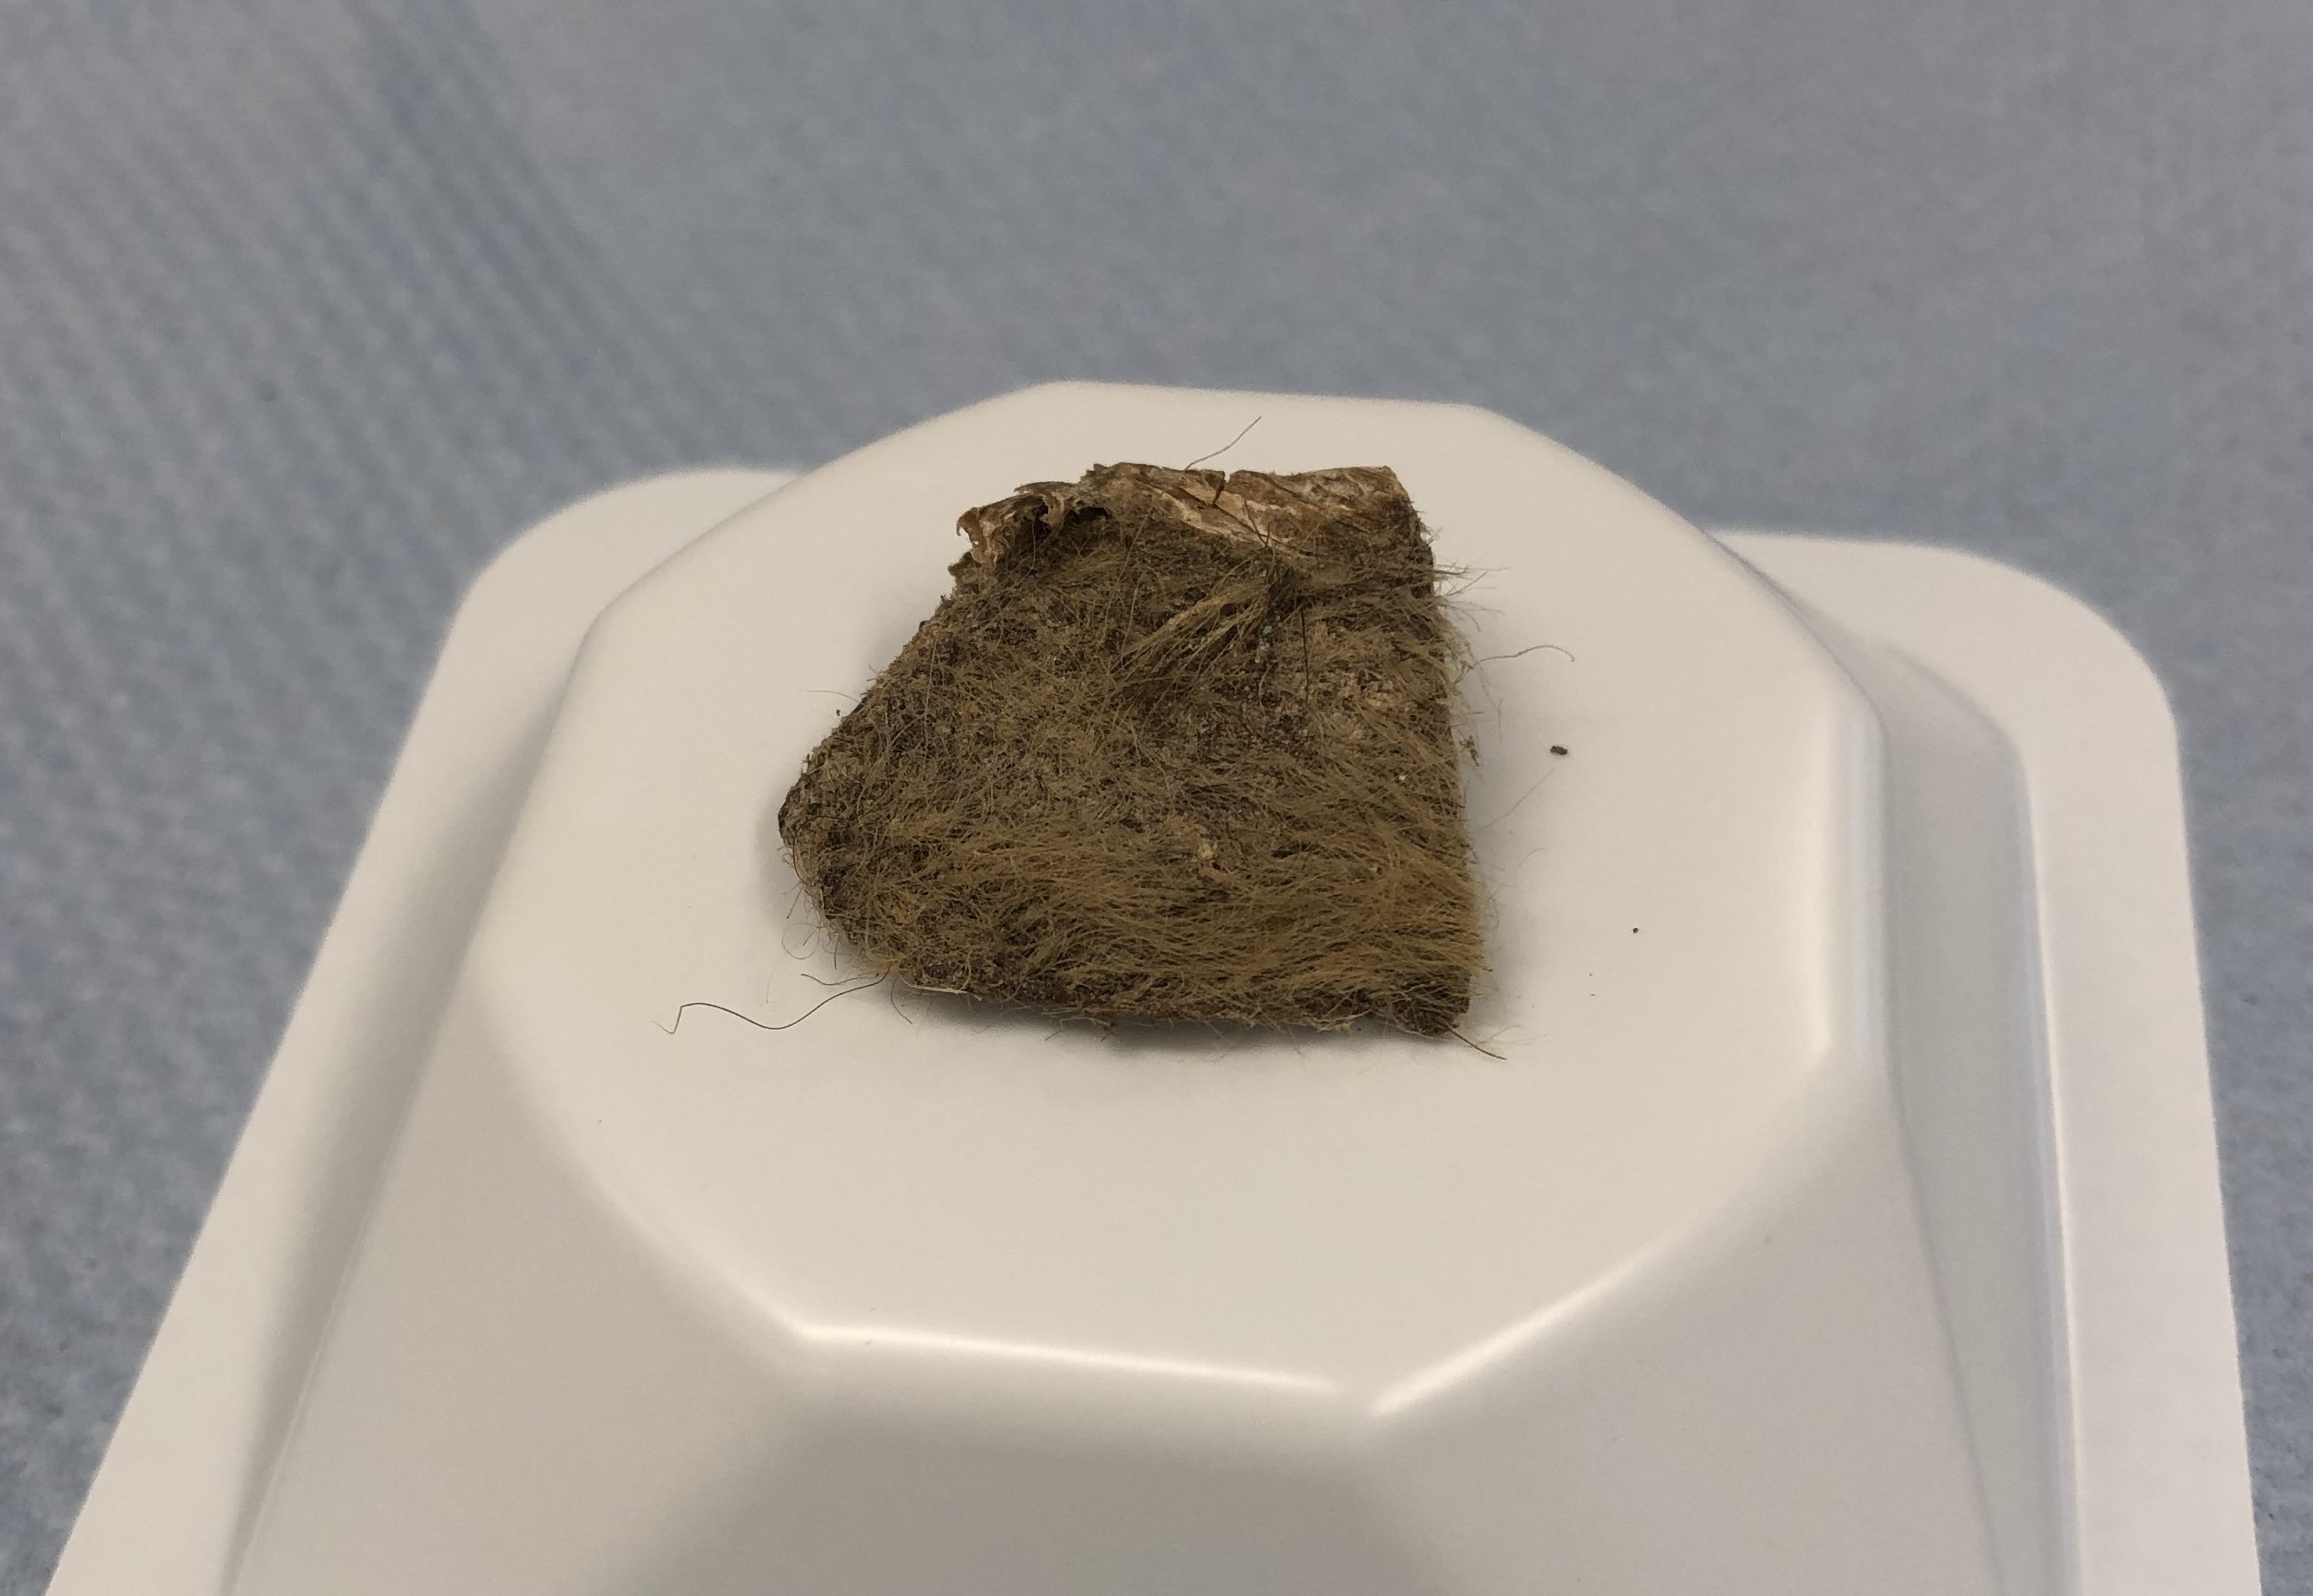 The piece of woolly rhino skin and fur that researchers found in the puppy's stomach.